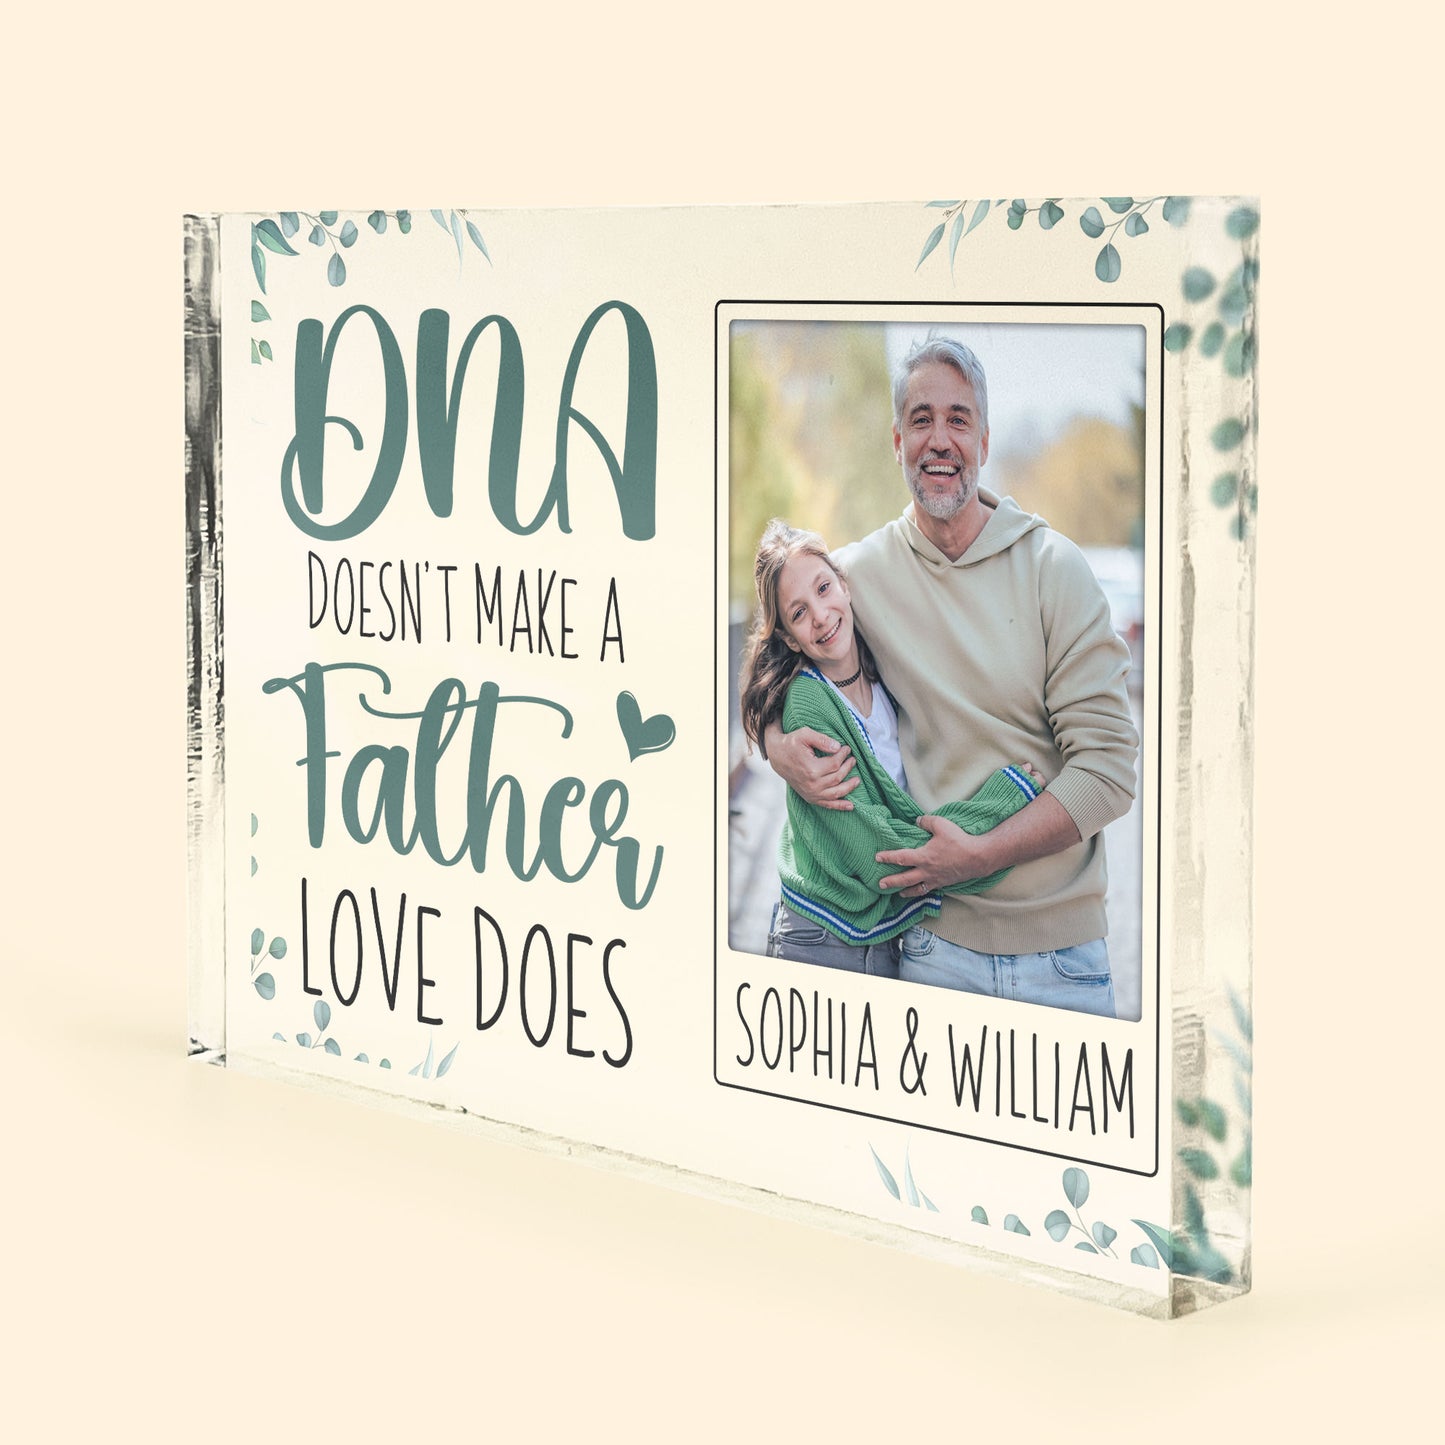 DNA Doesn't Make A Father, Love Does - Personalized Rectangle Acrylic Plaque